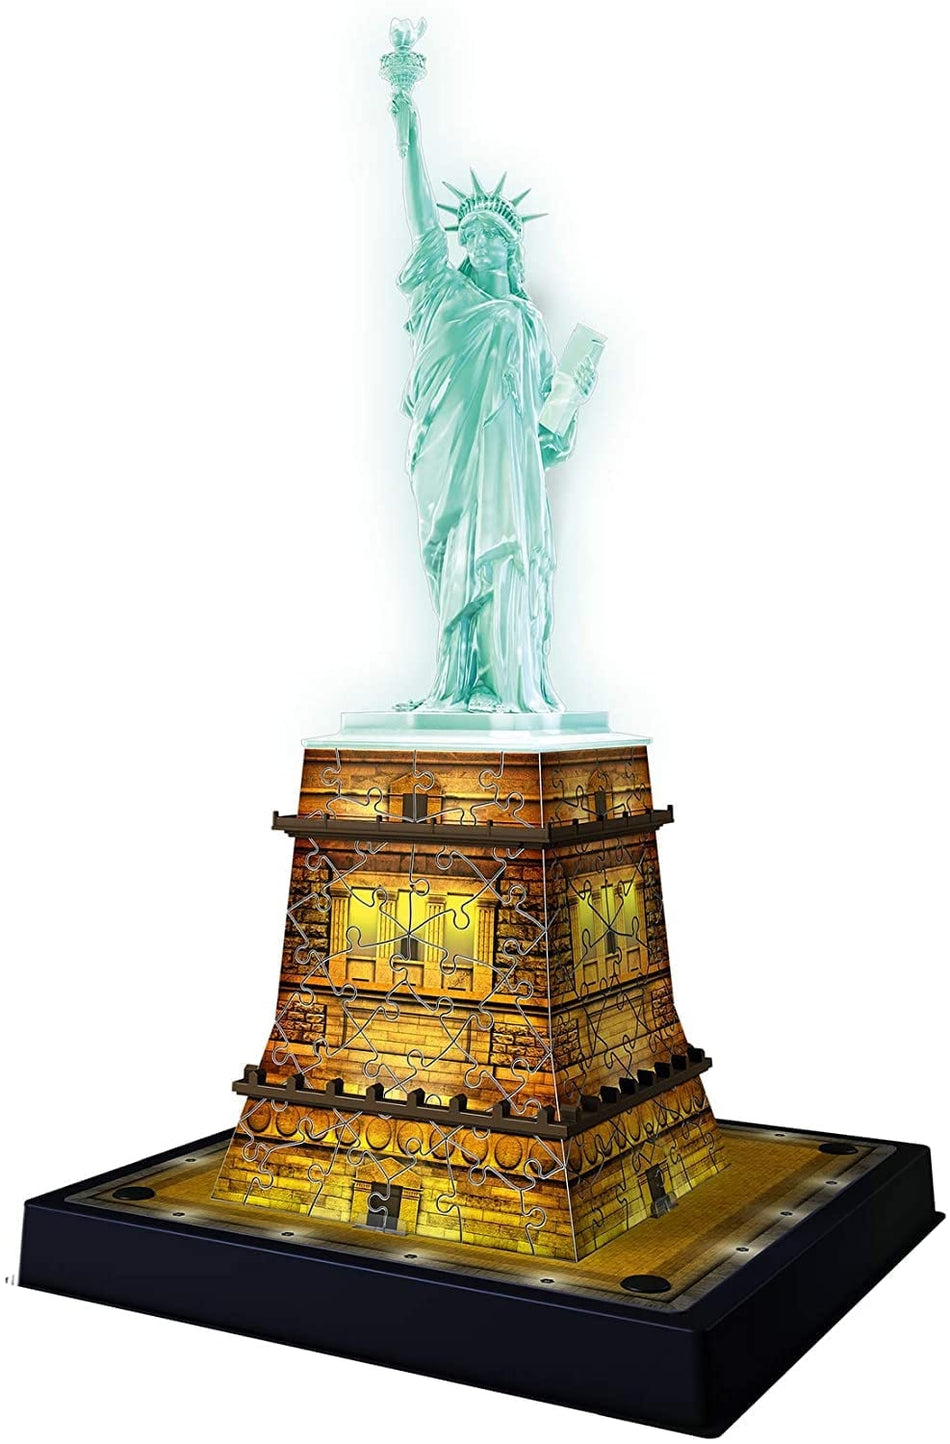 Ravensburger: Statue of Liberty Night Edition: 108 Piece 3D Puzzle